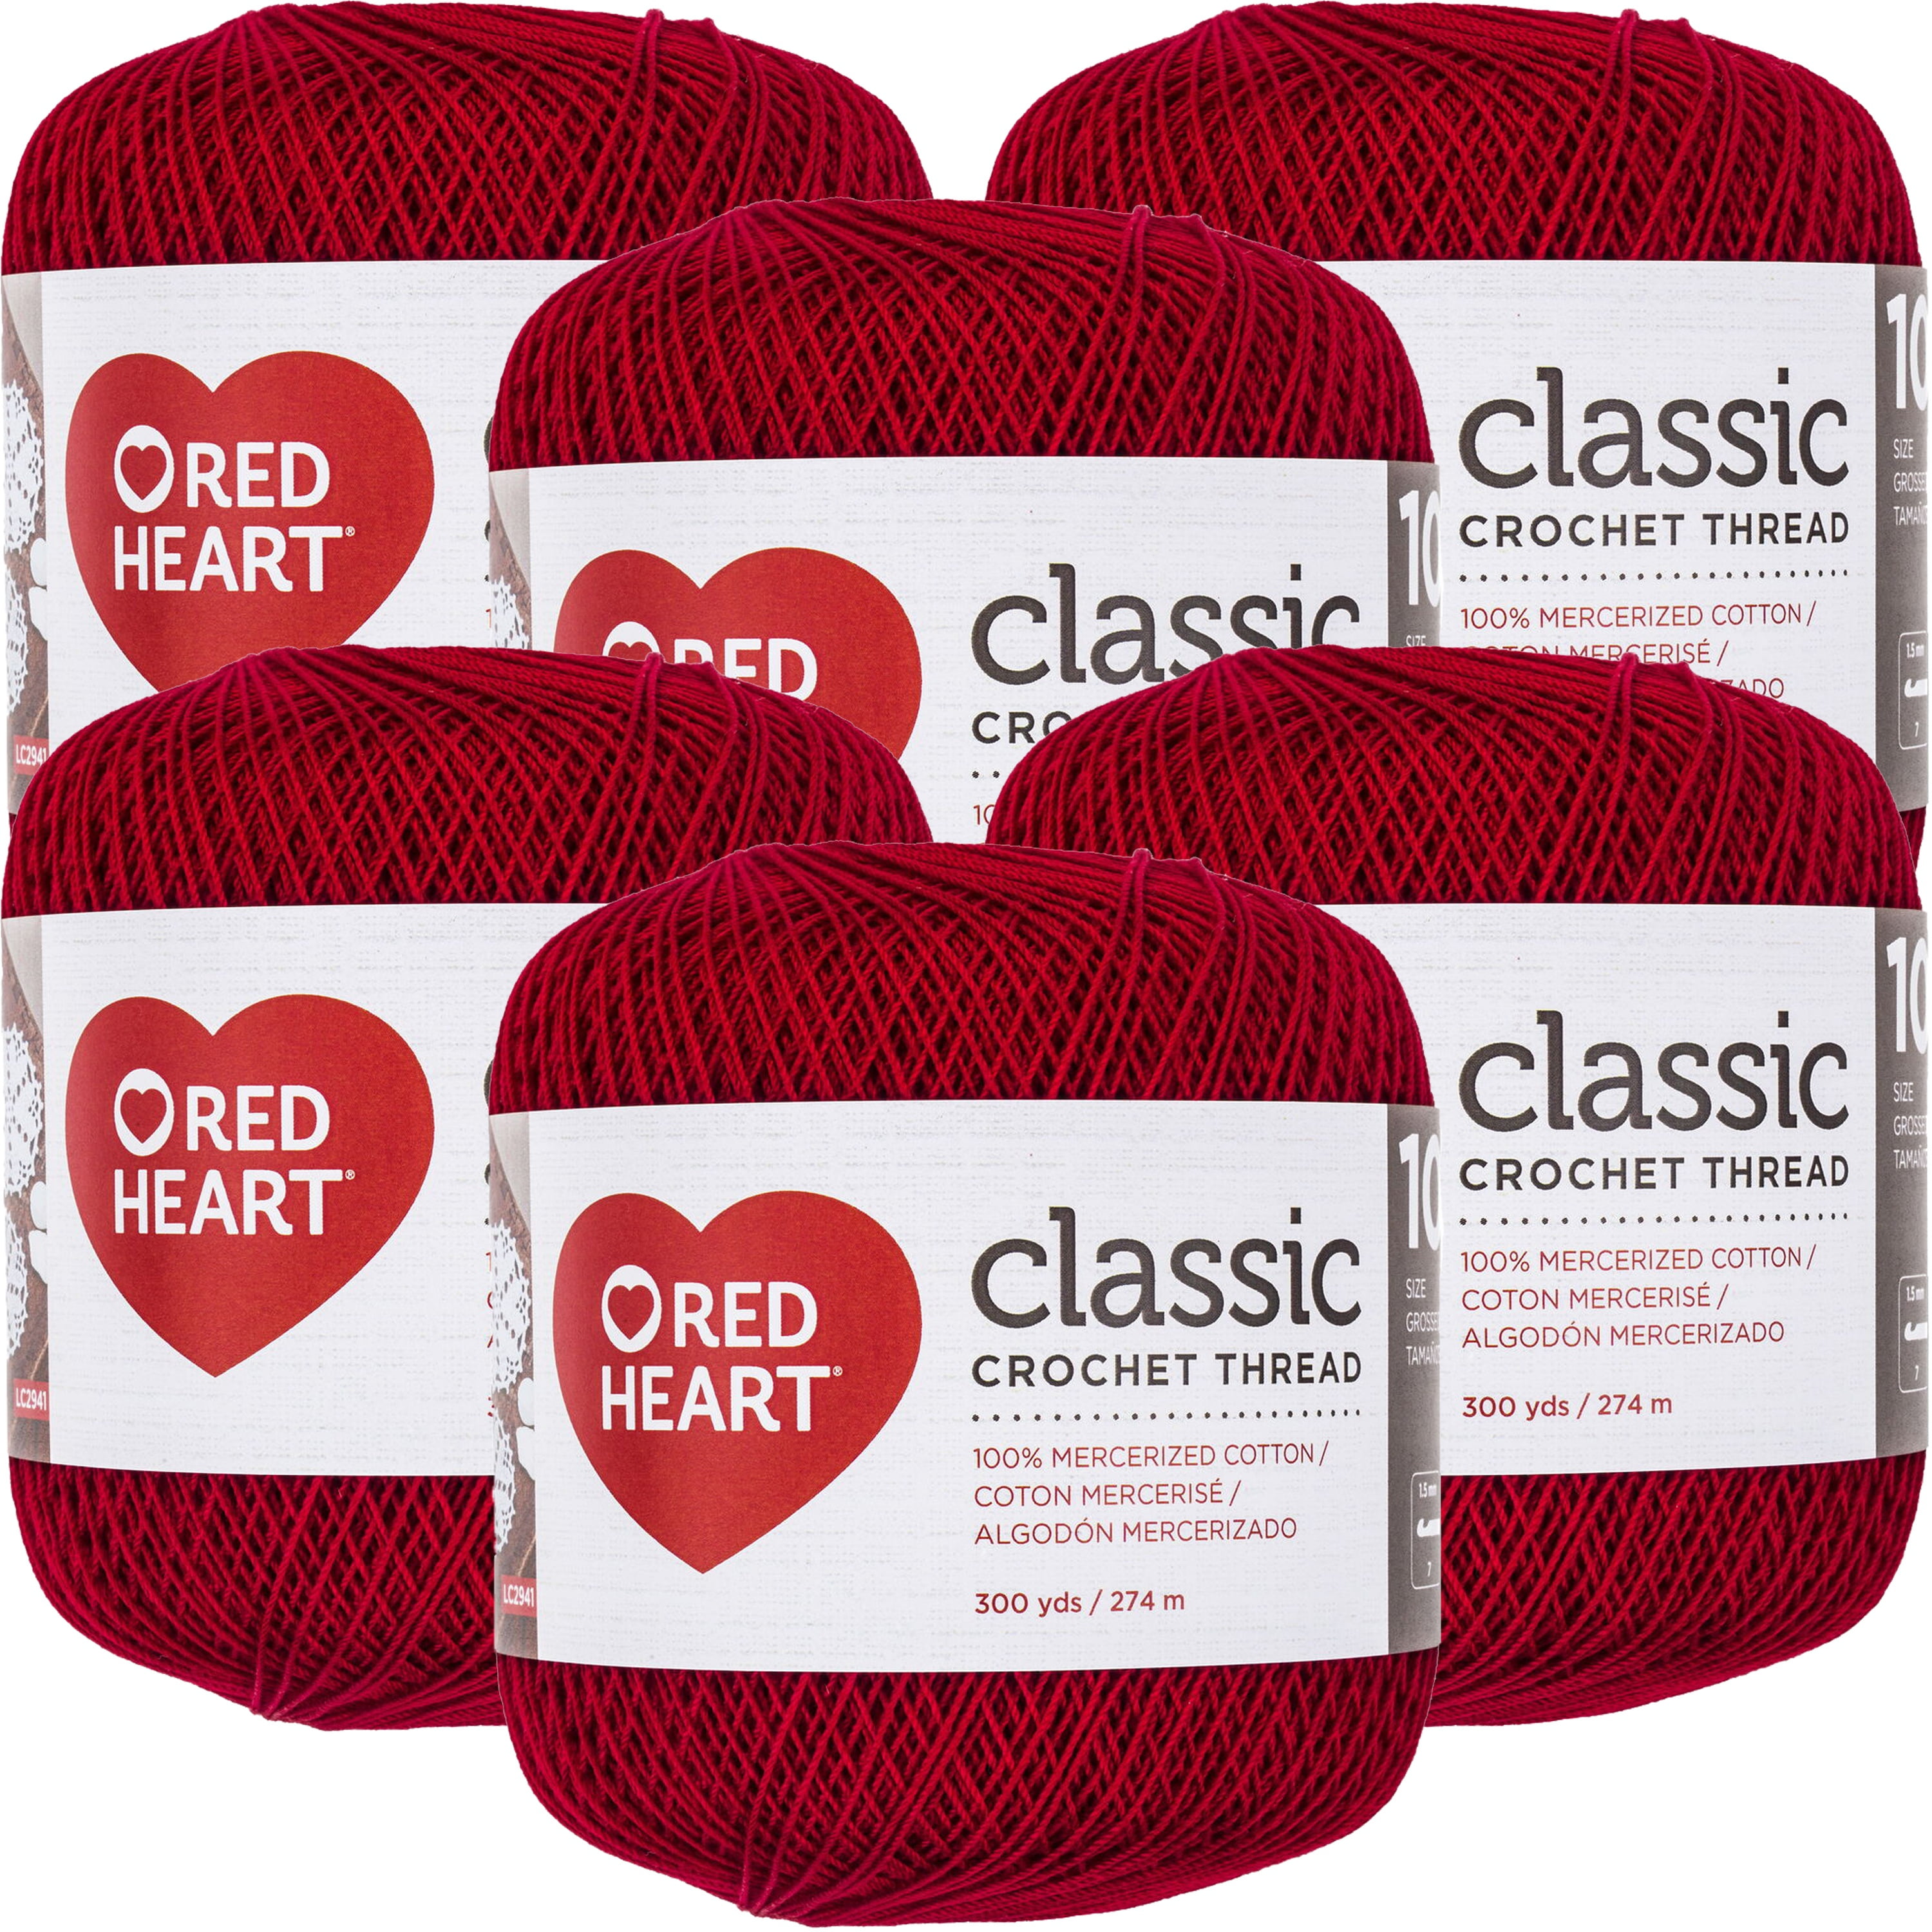 Red Heart Classic Orchid Pink  300 yd/274m Crochet Thread Size 10